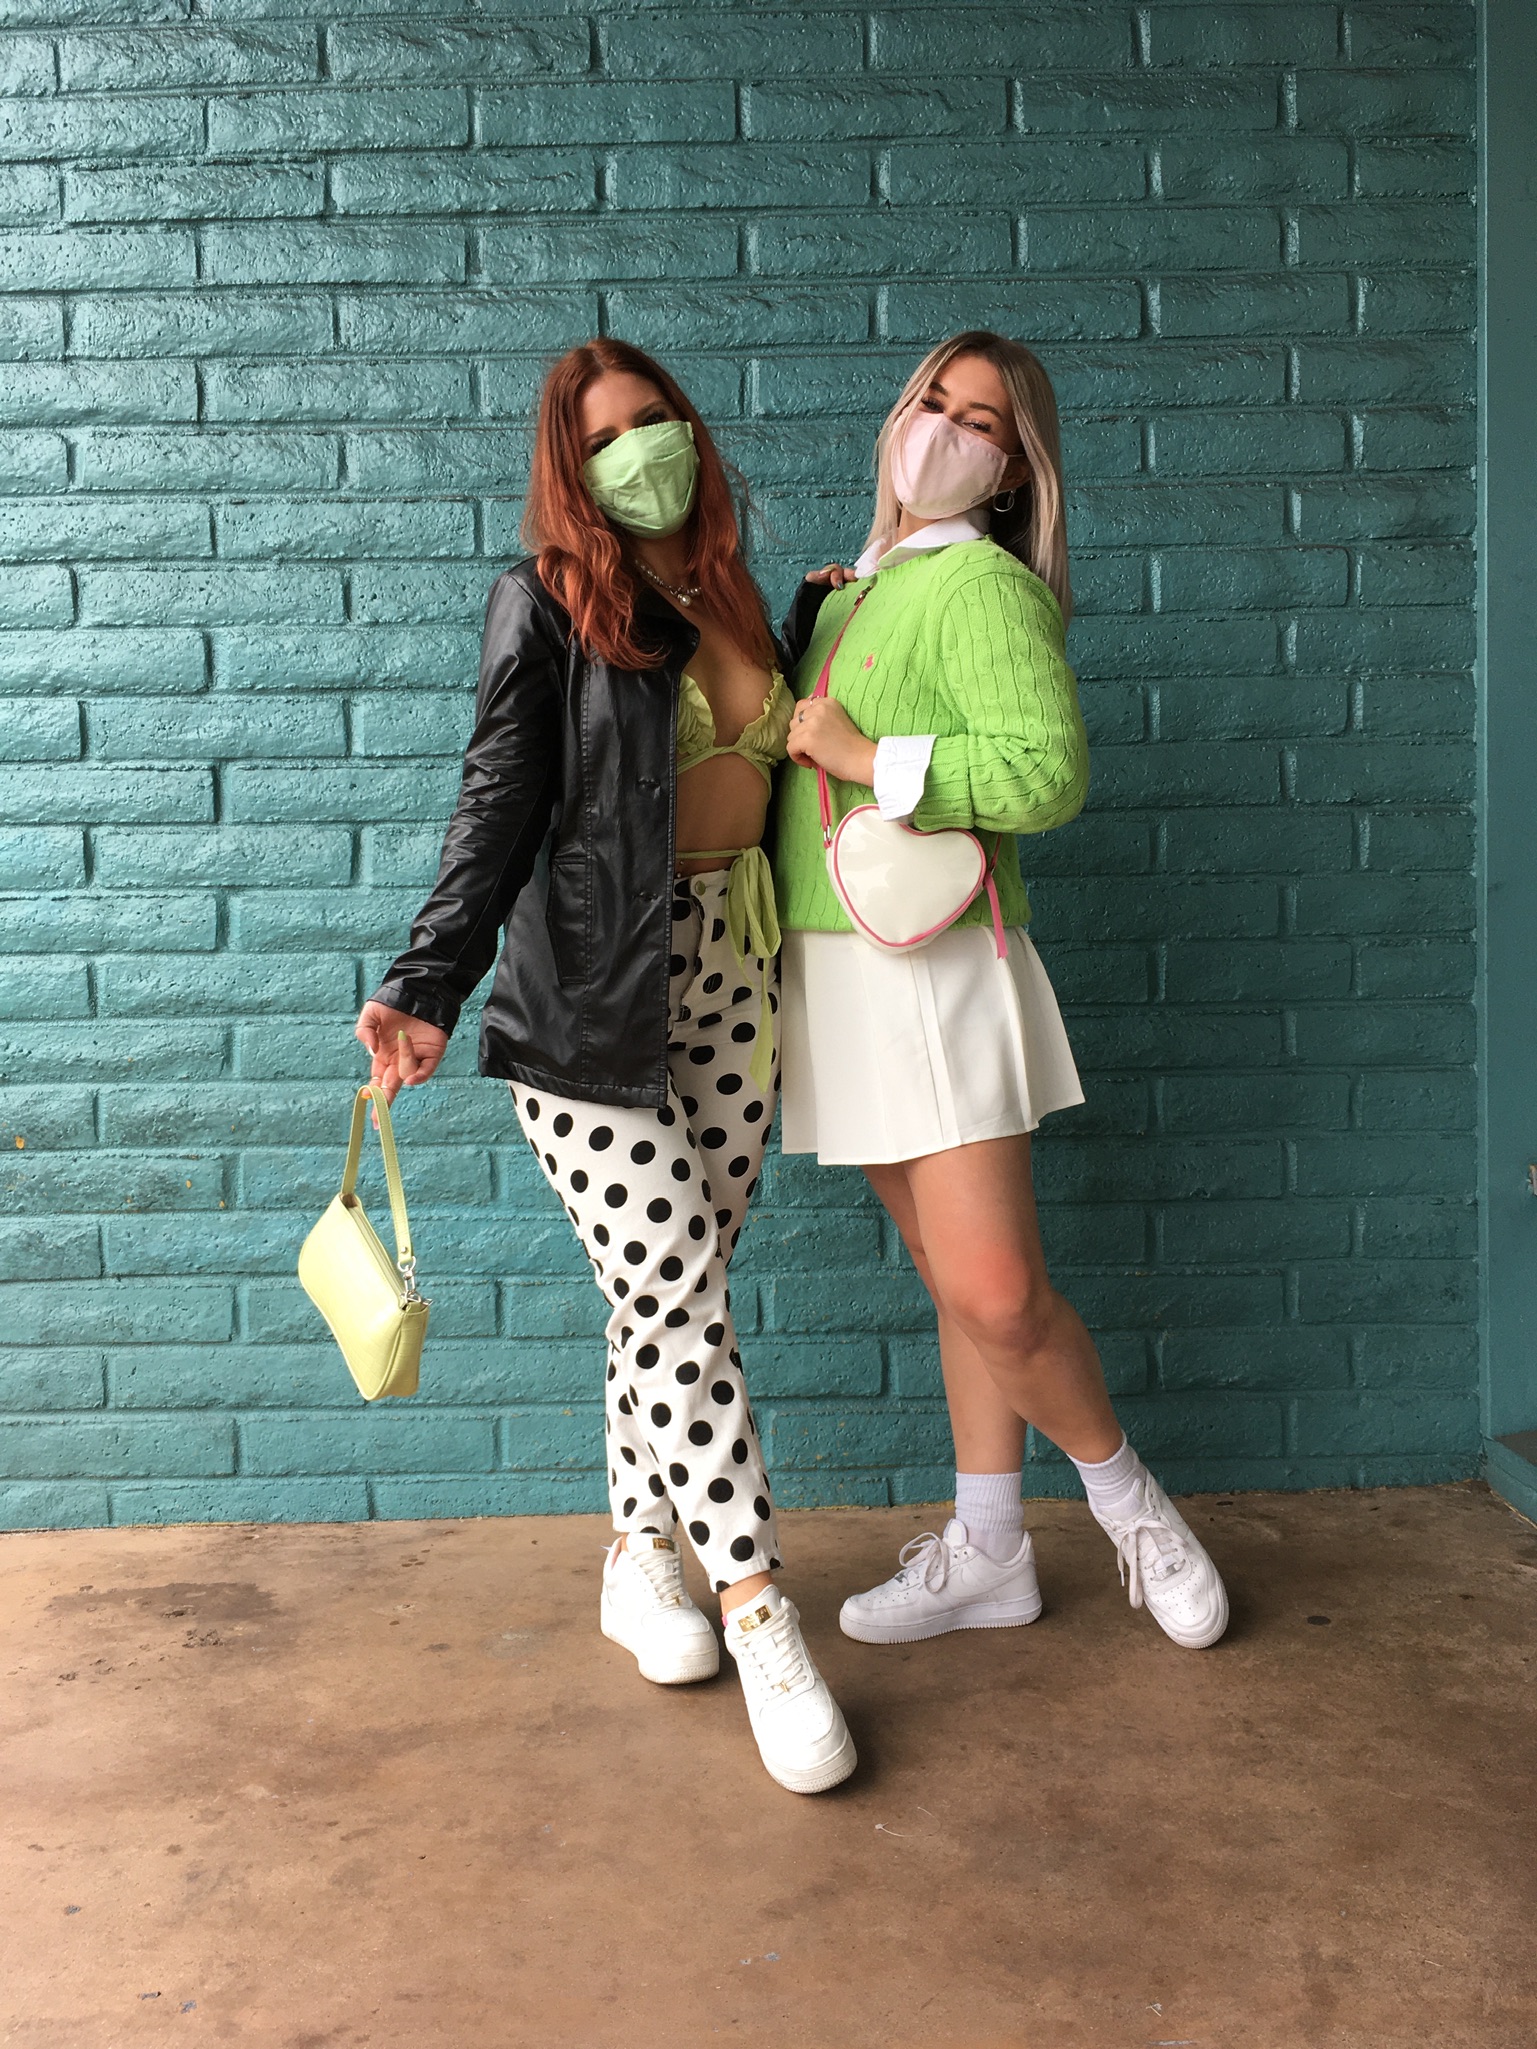 Two people wearing trendy spring clothing, one in a black leather jacket and polka dot pants, the other in a green sweater with white tennis skirt.